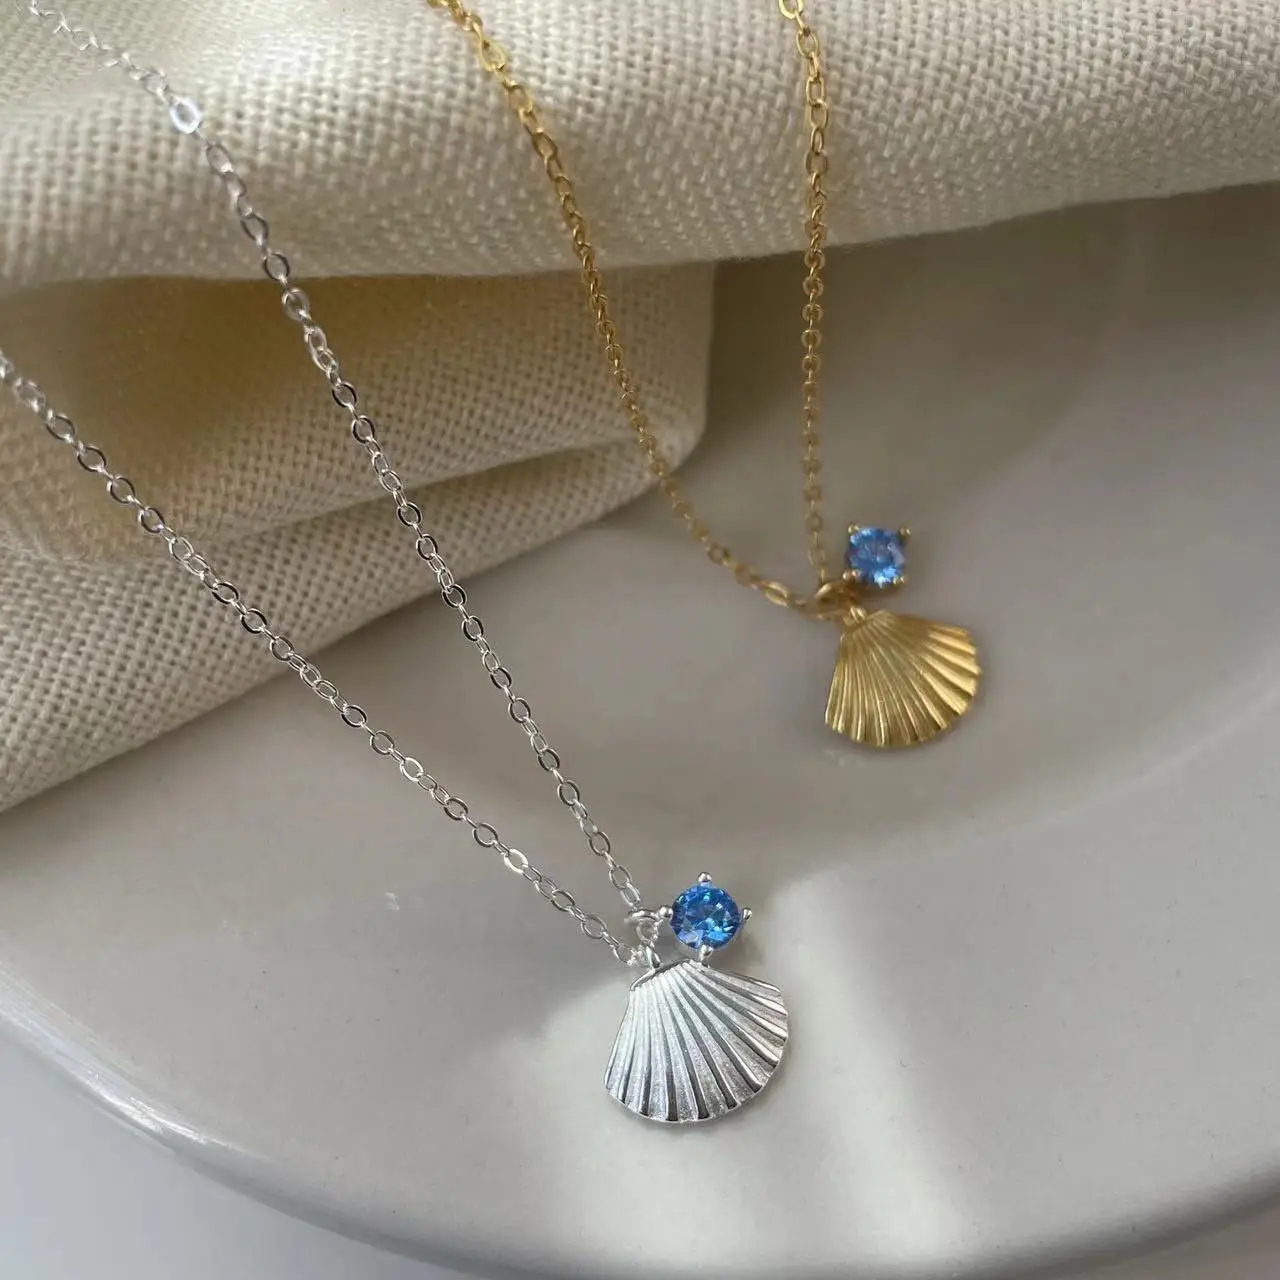 S925 Sterling Sliver Design Elegant Shell blue zirconium necklace Jewelry Women Valentine's Day and Mother's Day Gift